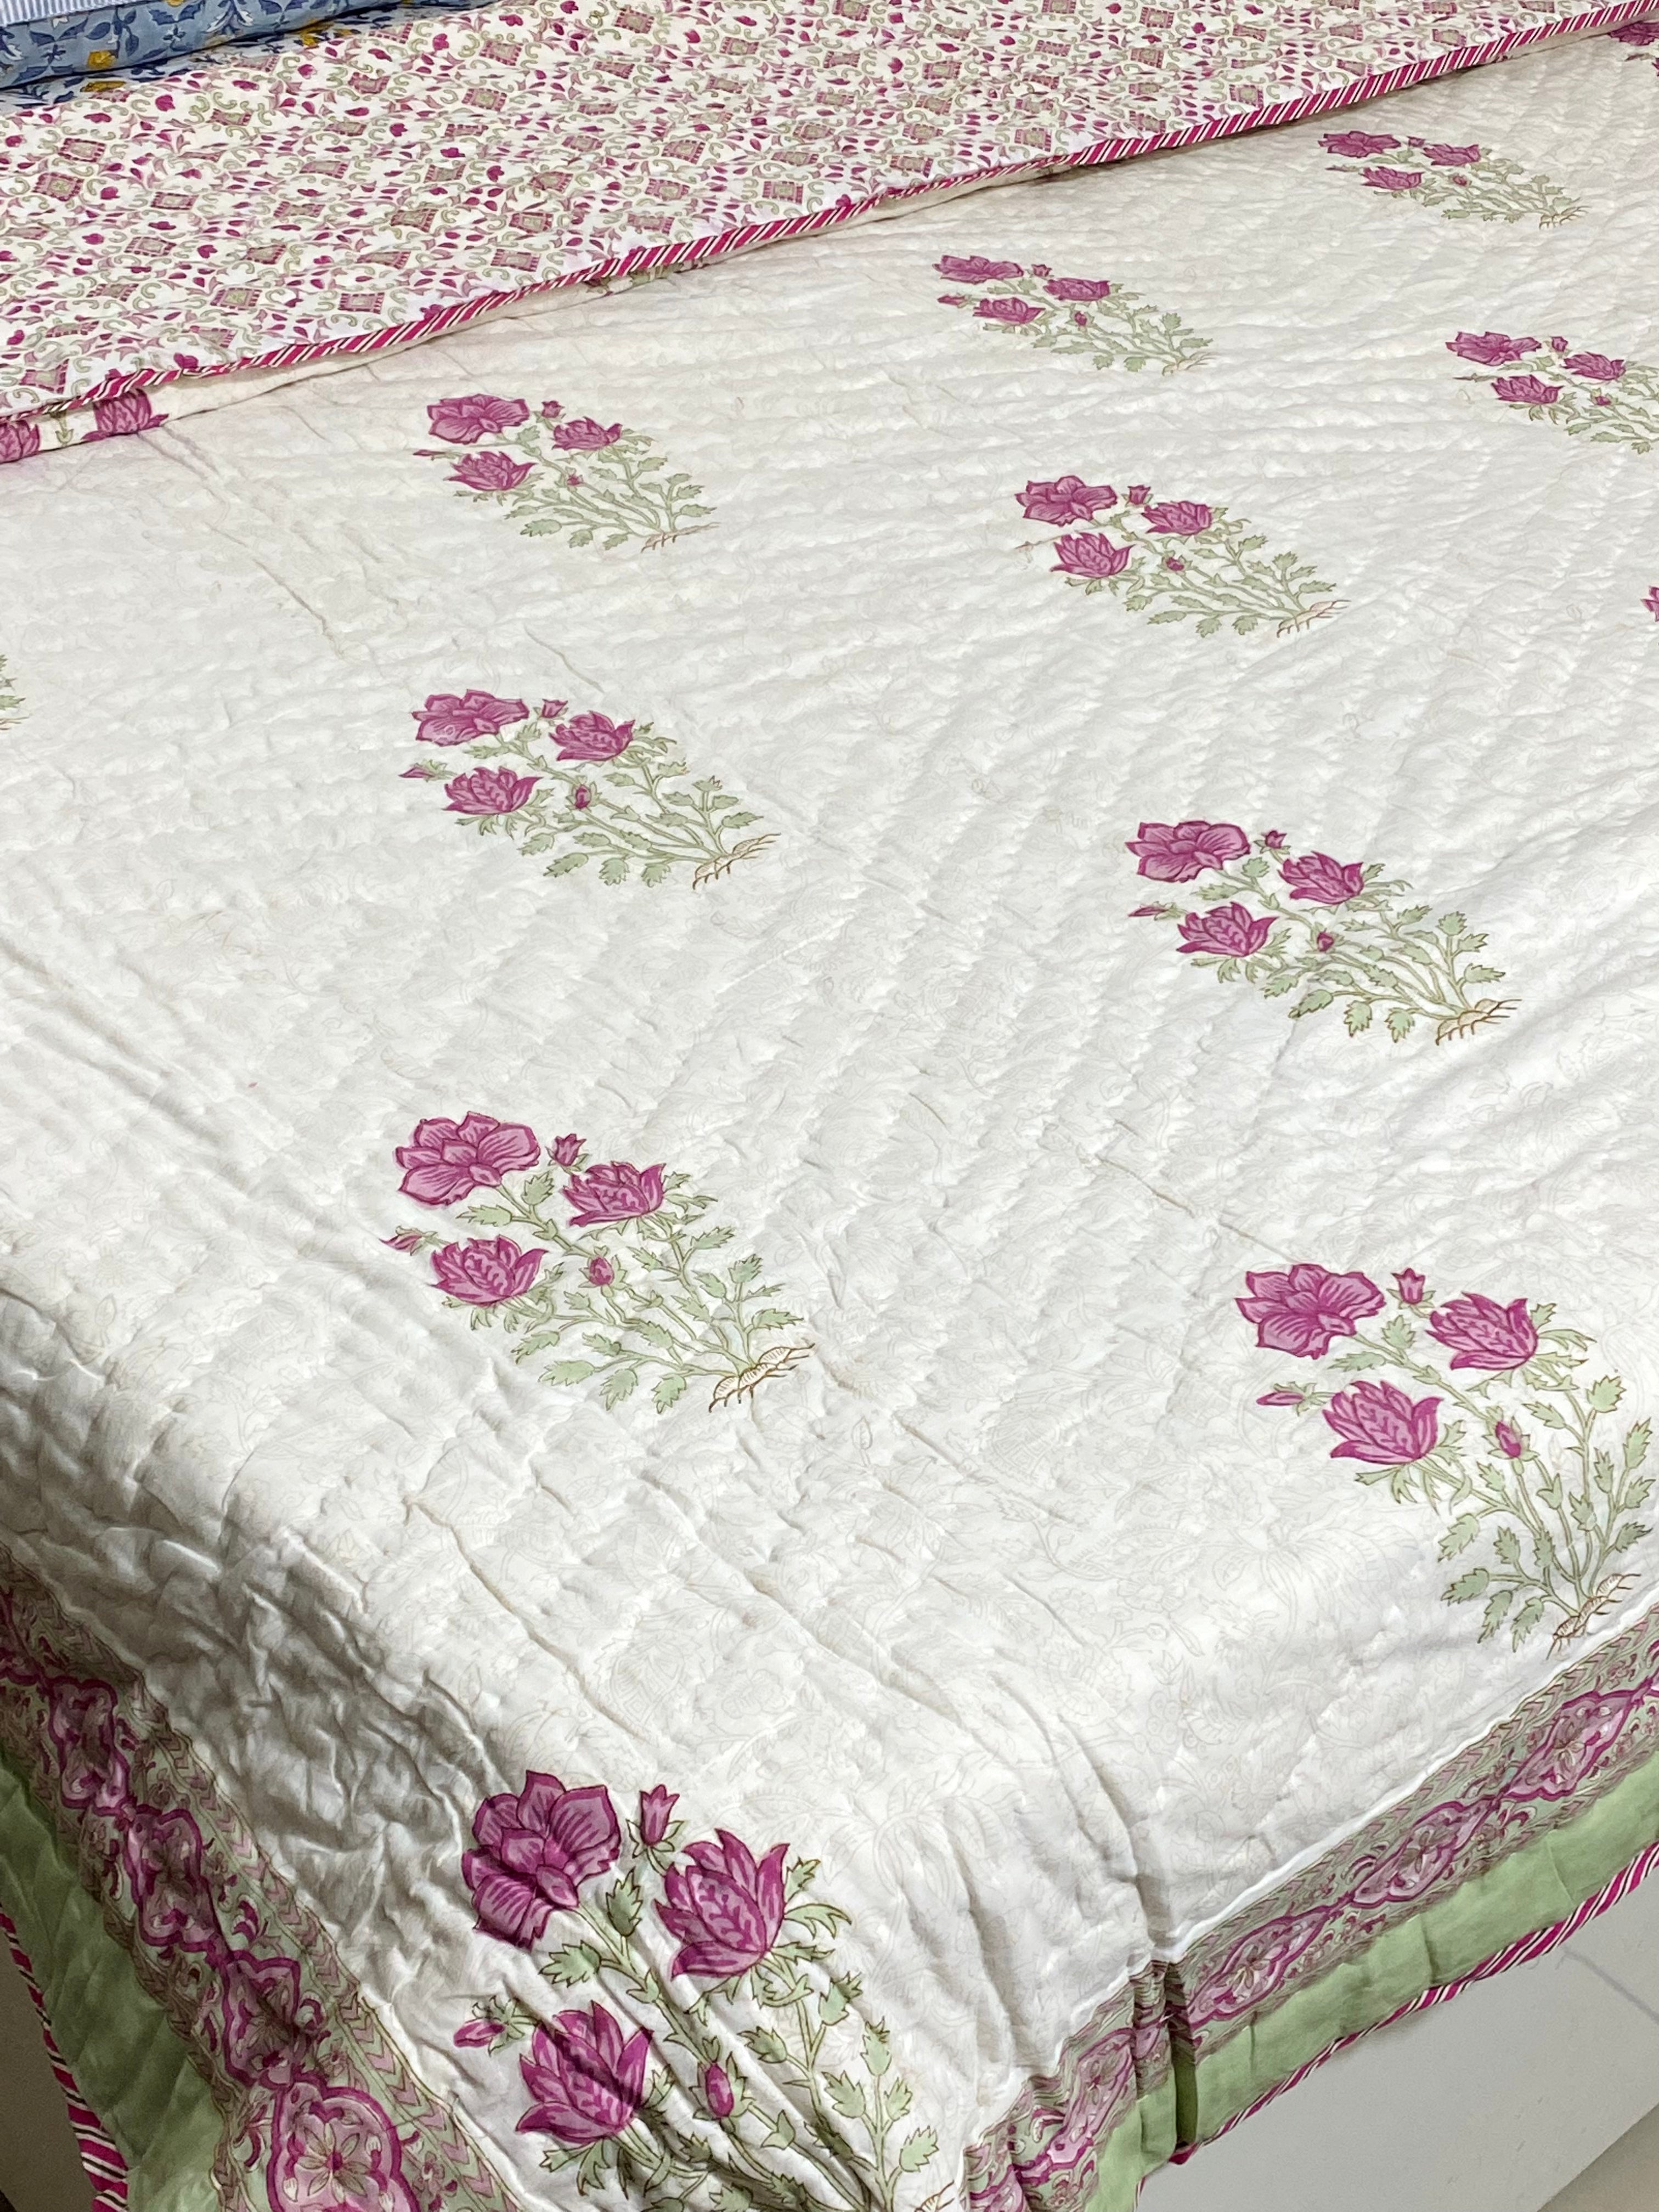 HandBlock Printed Mulmul Reversible Quilt- King Size (108*108 inches)